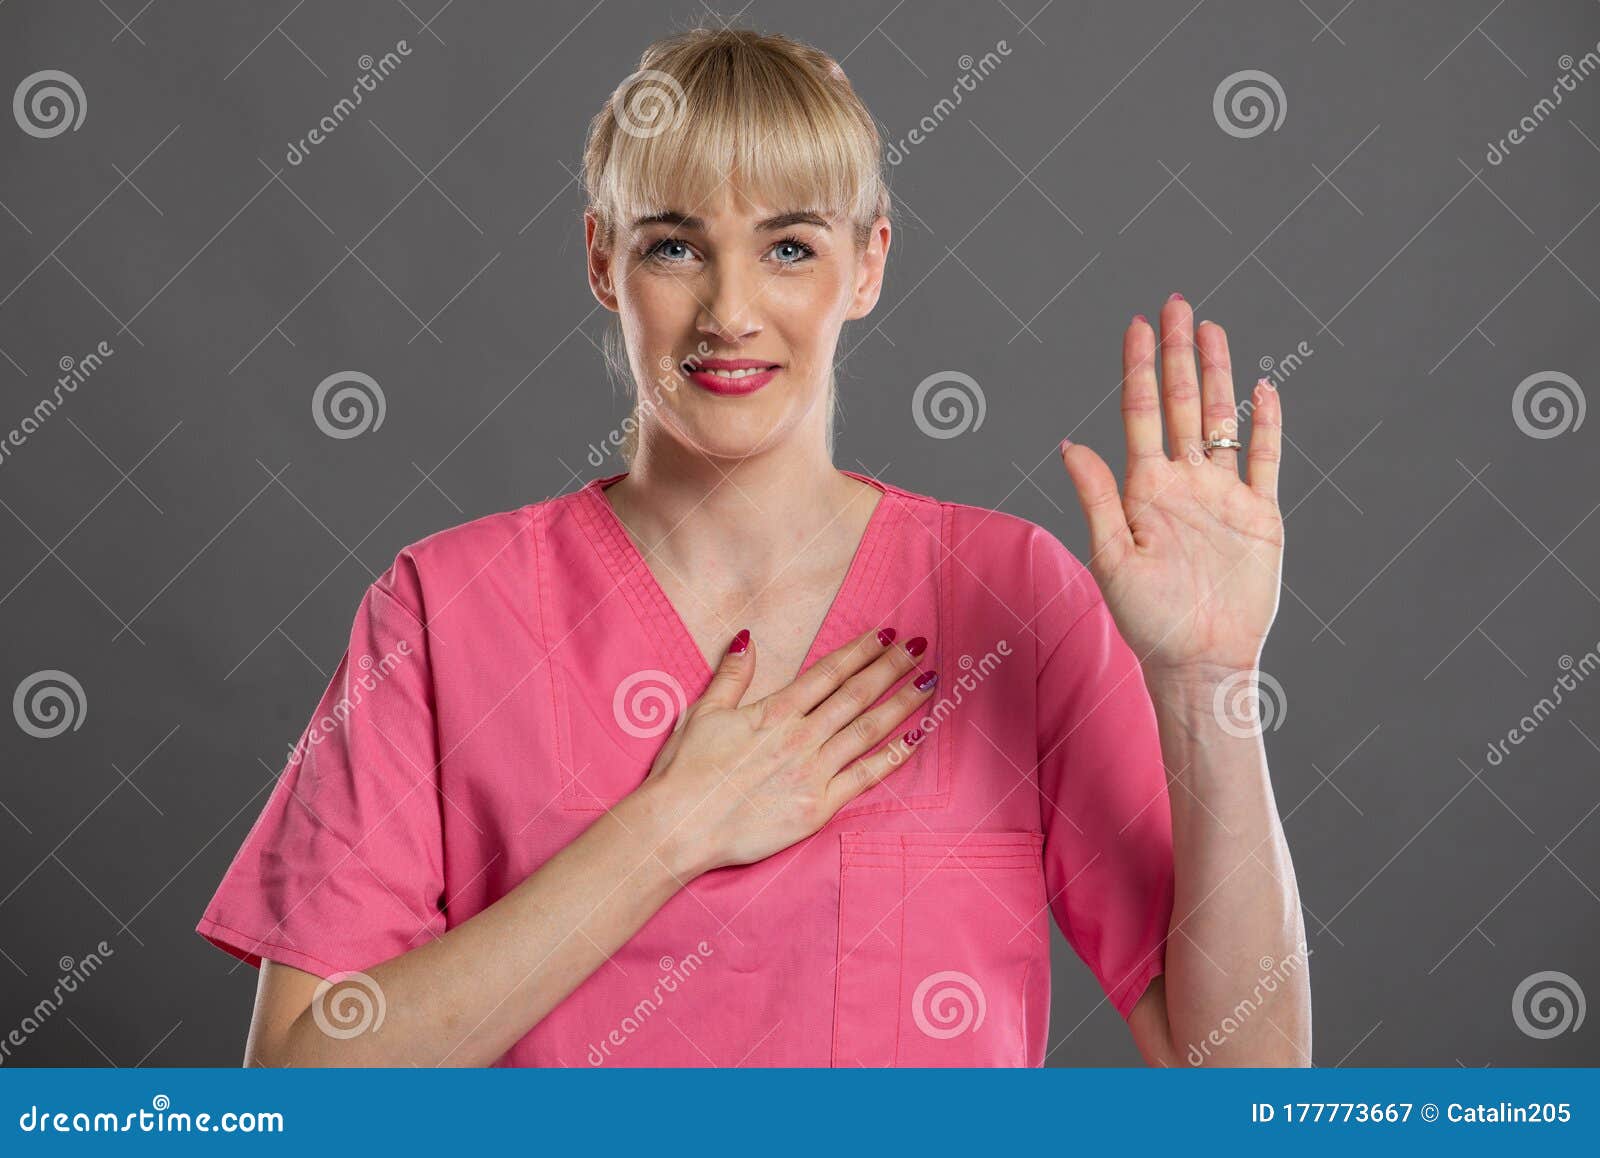 Portrait Of An Attractive Young Female Doctor Or Nurse In 